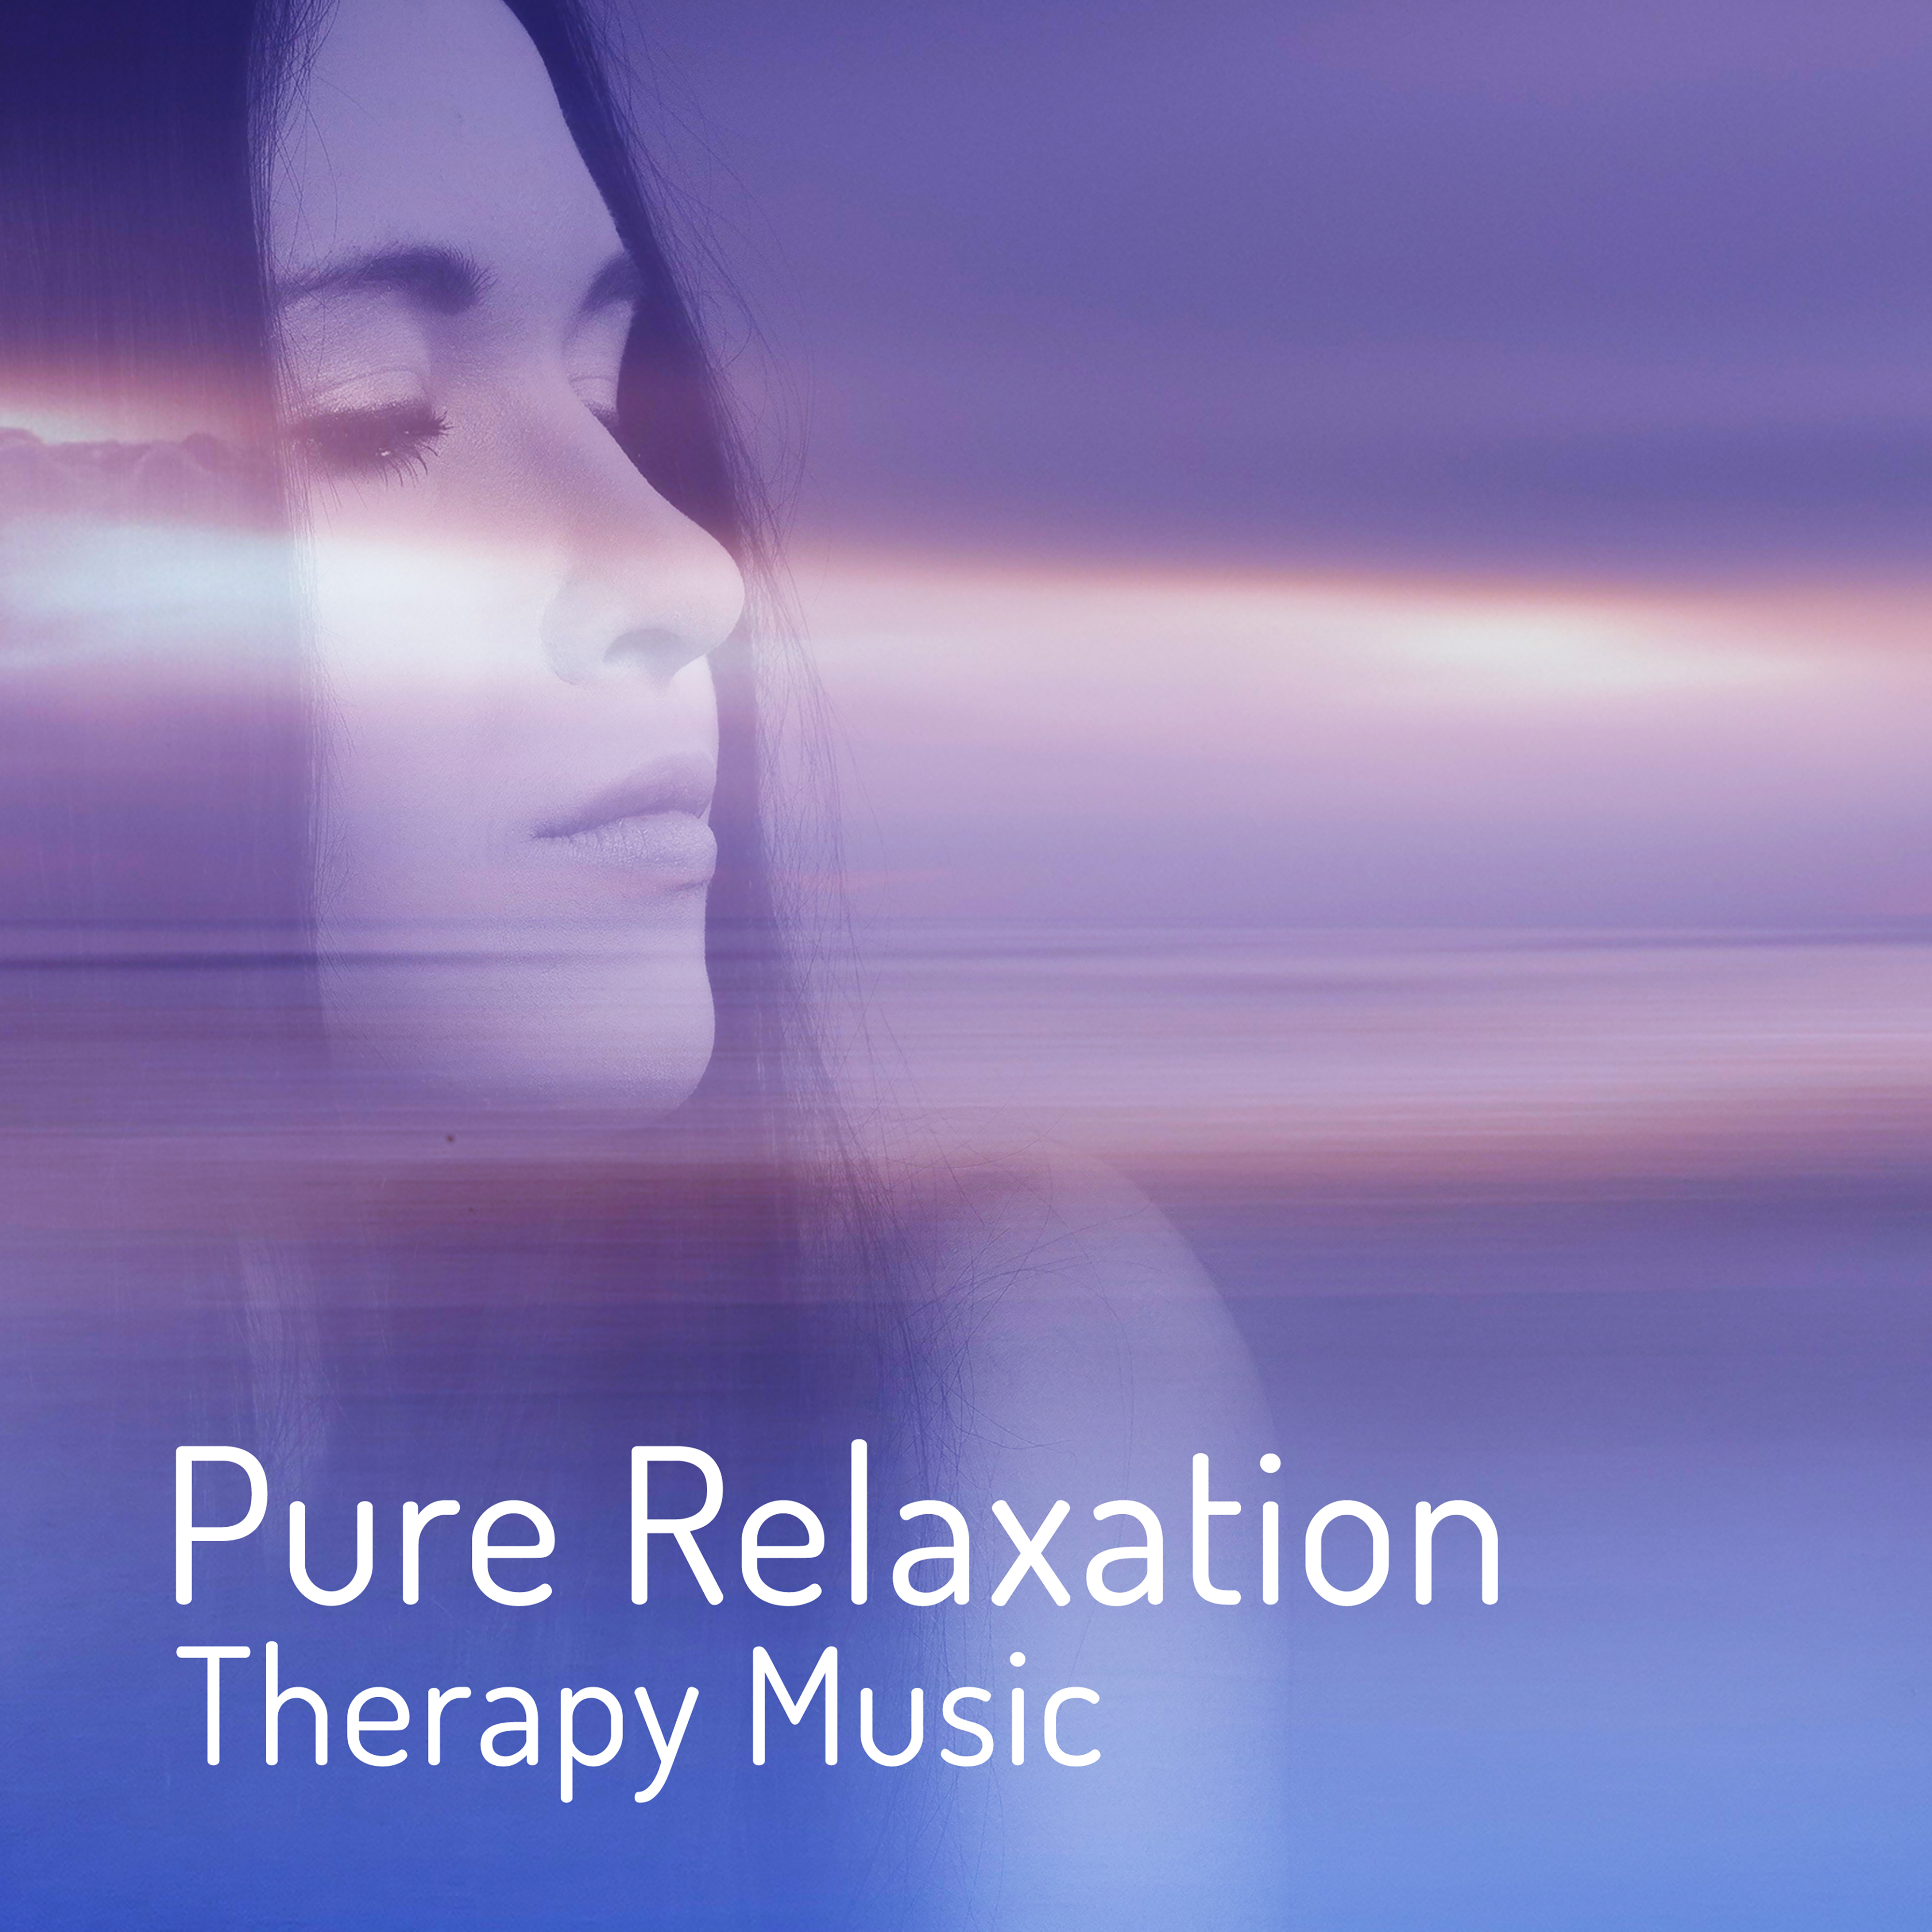 Pure Relaxation Therapy Music – Relaxing Music, Sounds of Nature, Rest After Work, New Age Collection